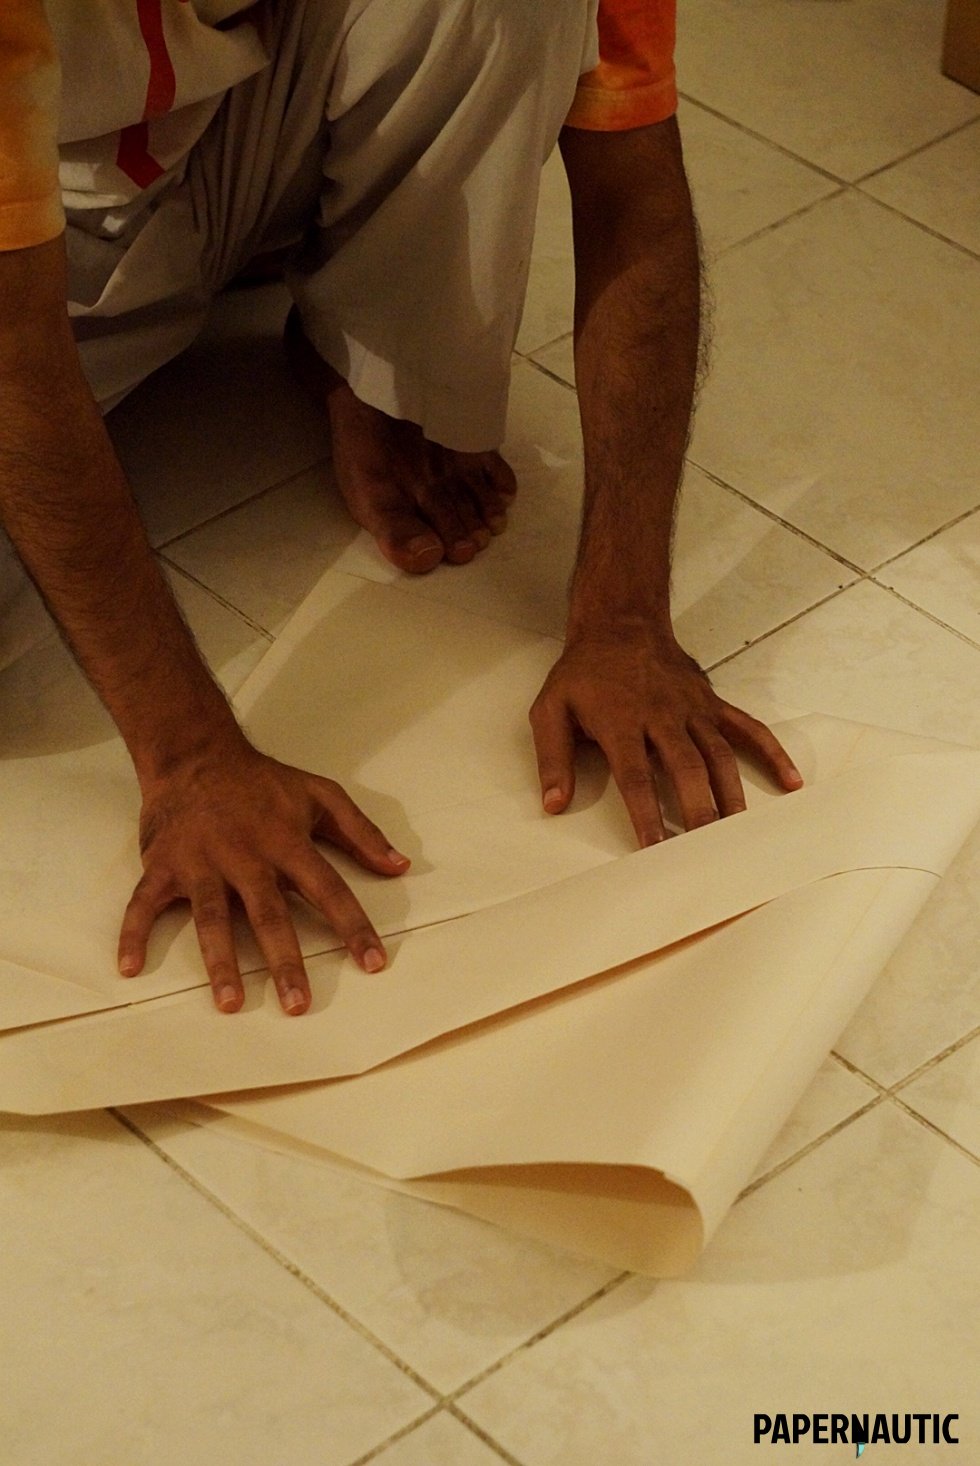 Large sheet of paper being folded into a samurai paper hat on the floor.